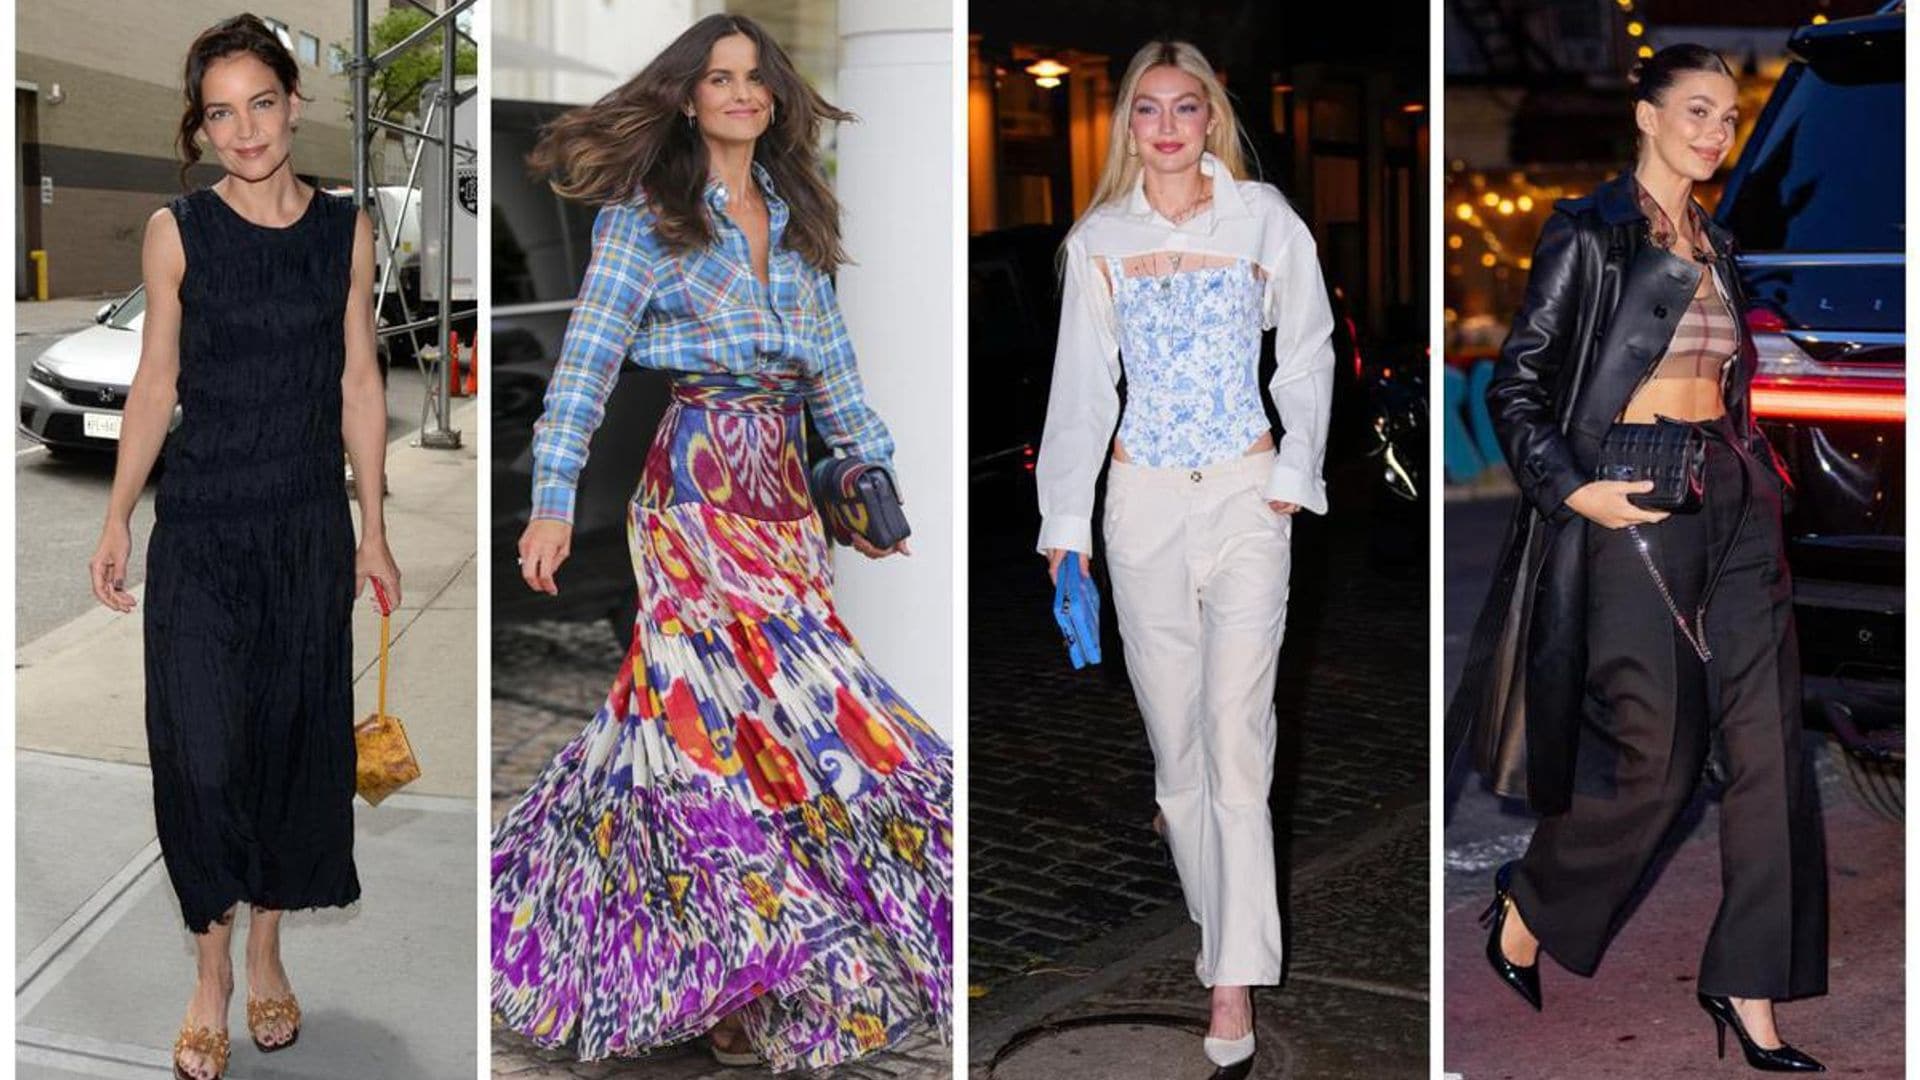 Top Celeb Styles of the Week - May 27th